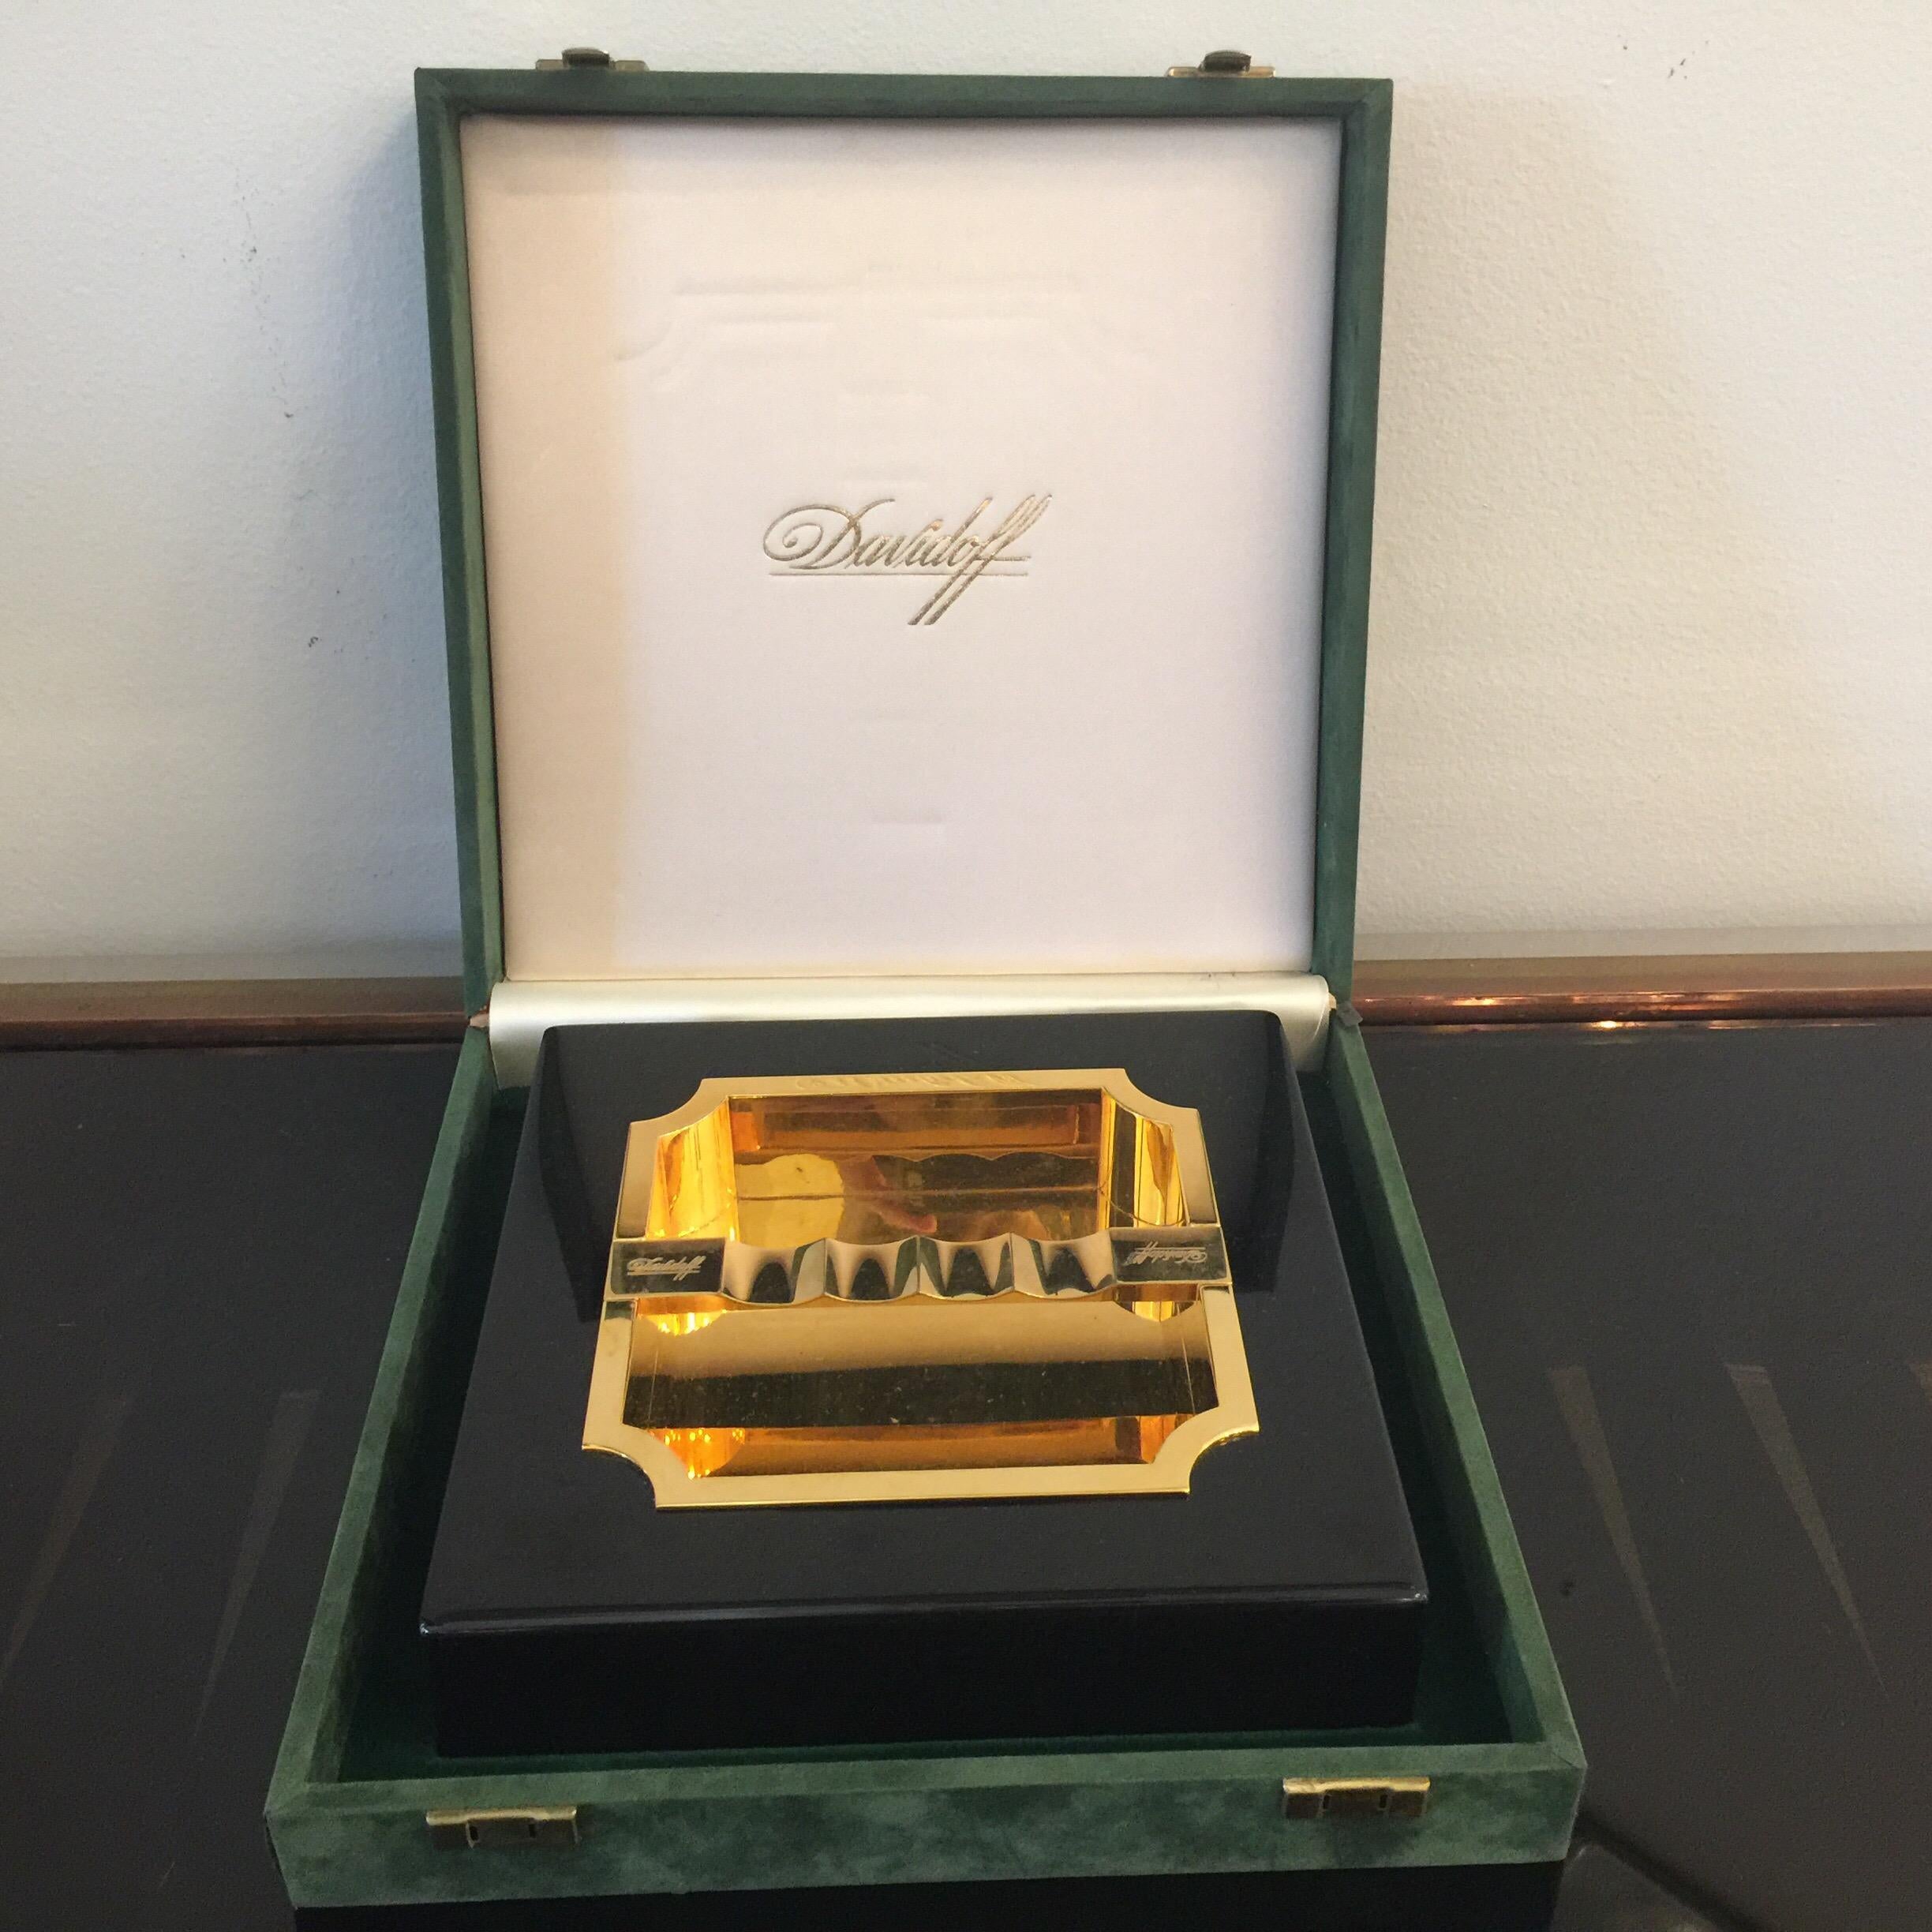 In its original velvet clad box, this unused gold-plated metal and black resin cigar ash tray by Davidoff is a rare find. Mad Men period luxury item!